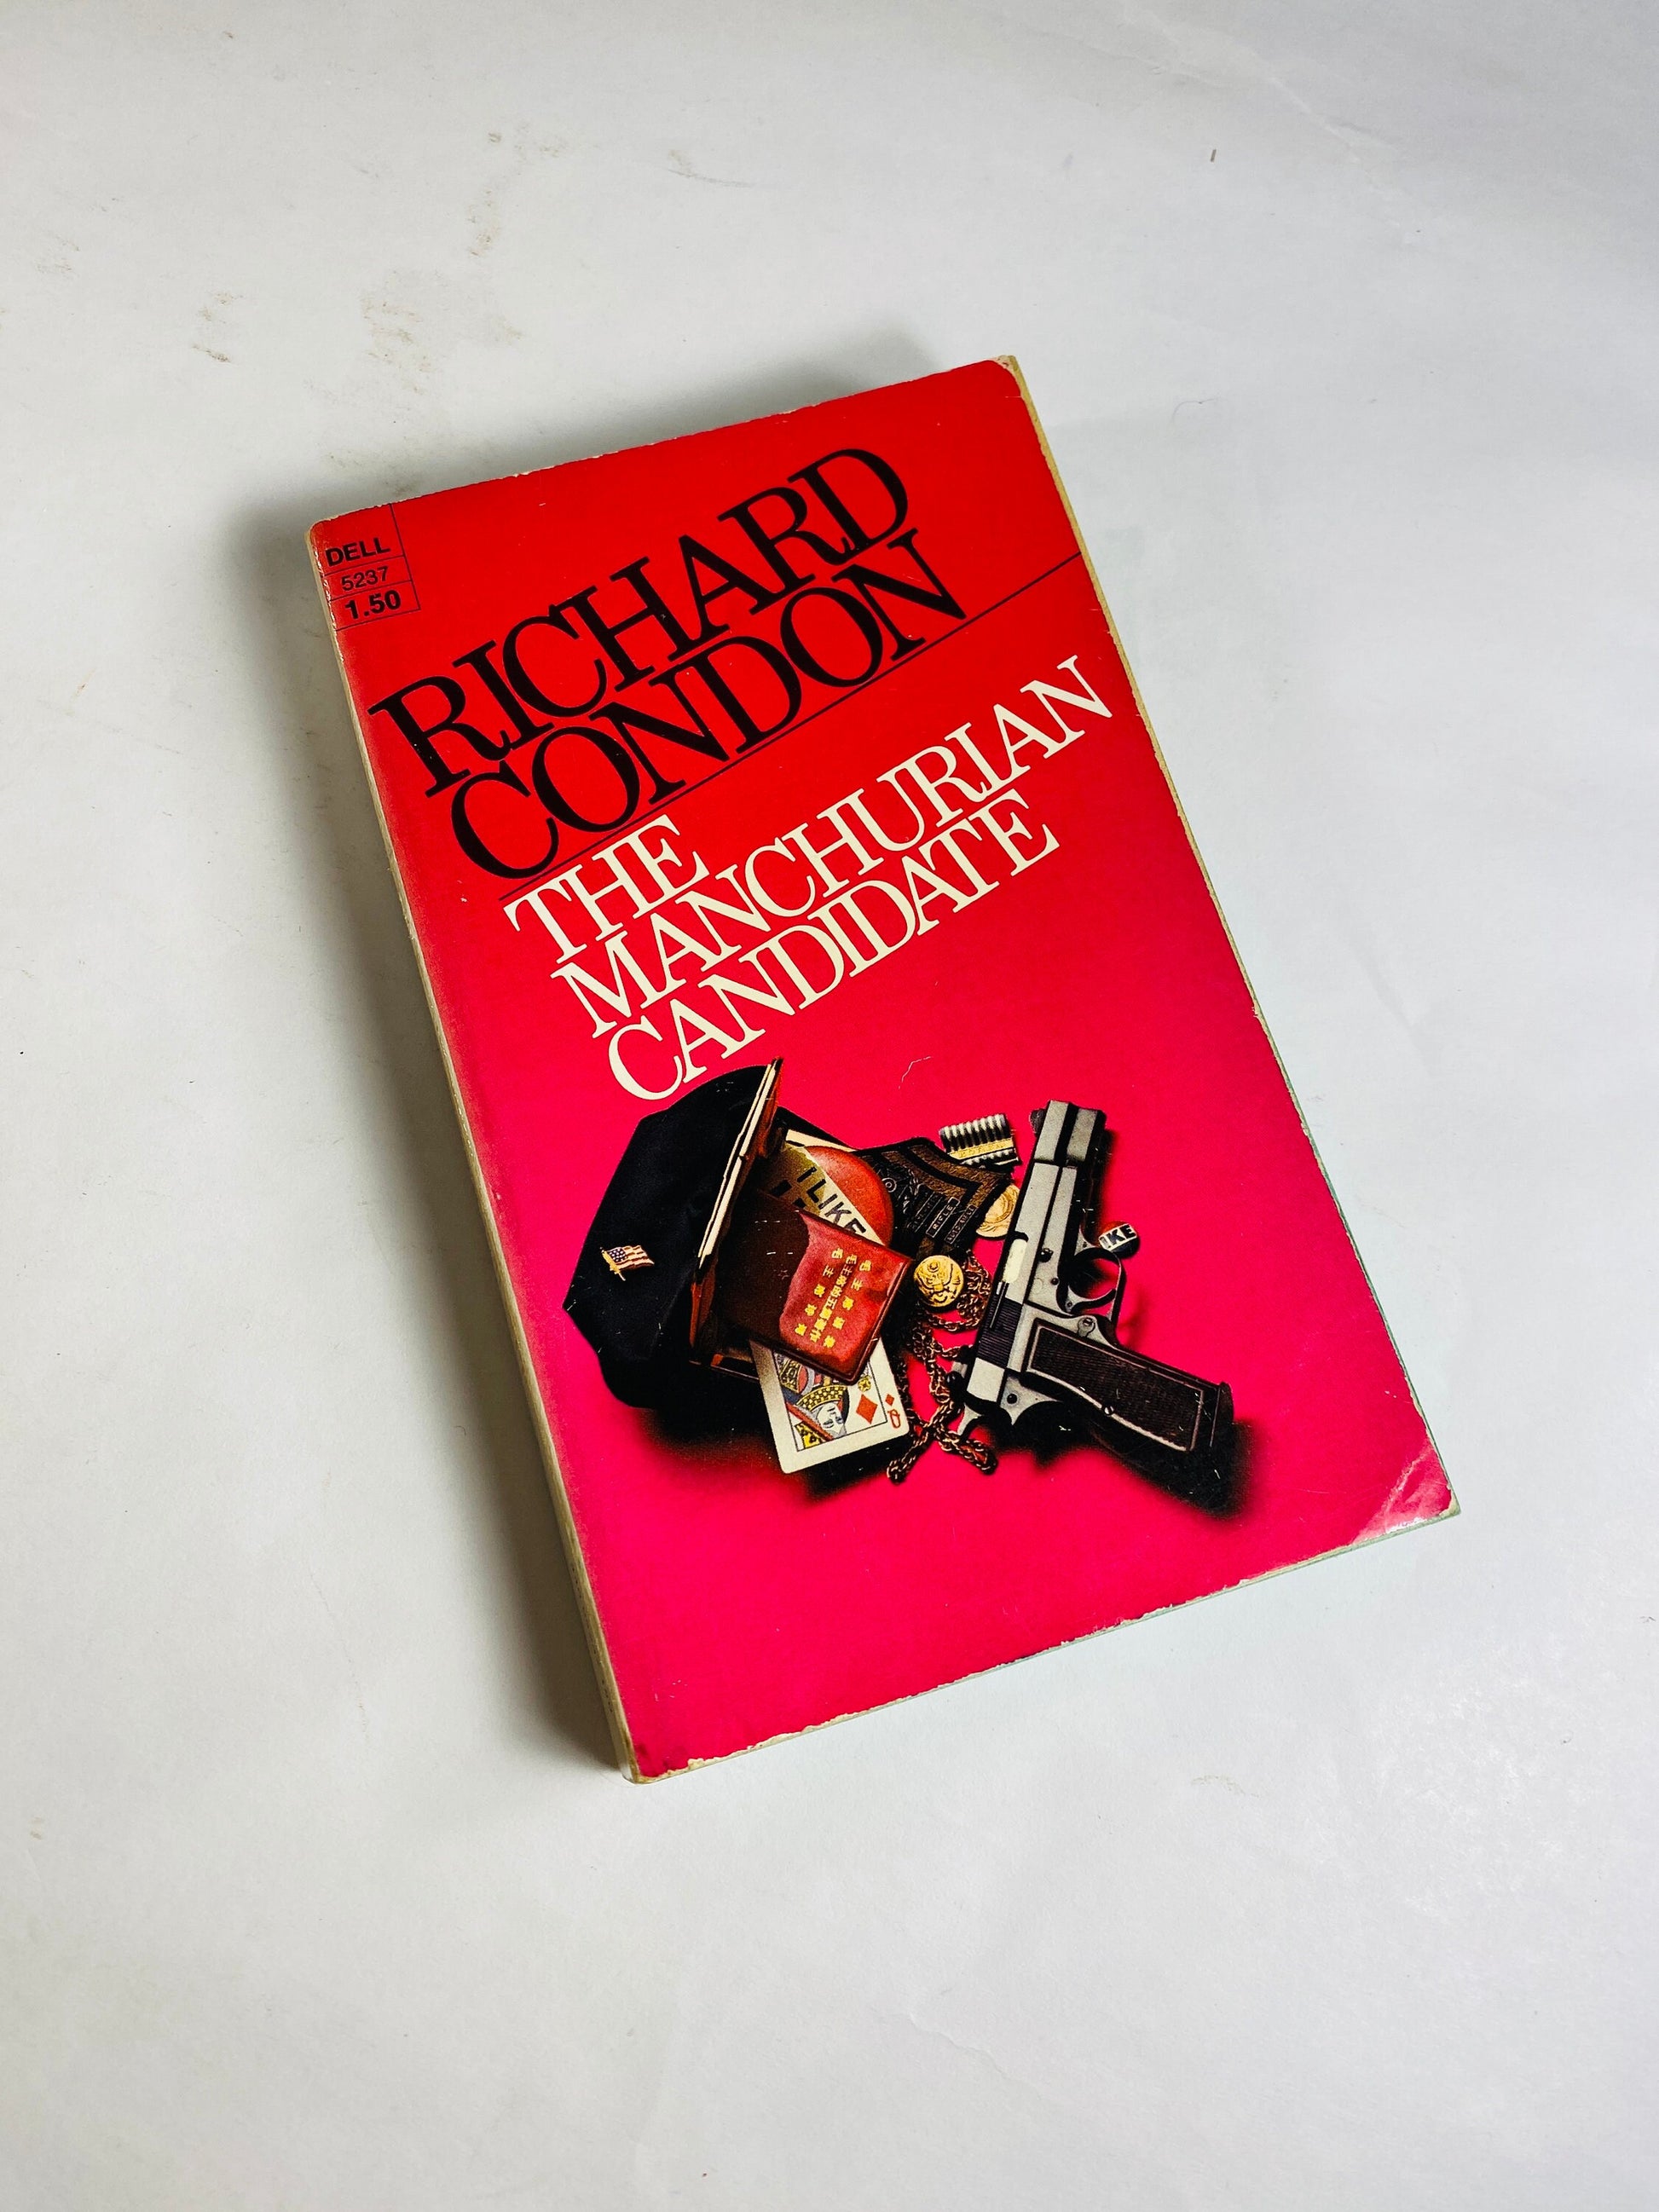 Manchurian Candidate vintage paperback book by Richard Condon circa 1974 Political thriller about becoming a Communist assassin